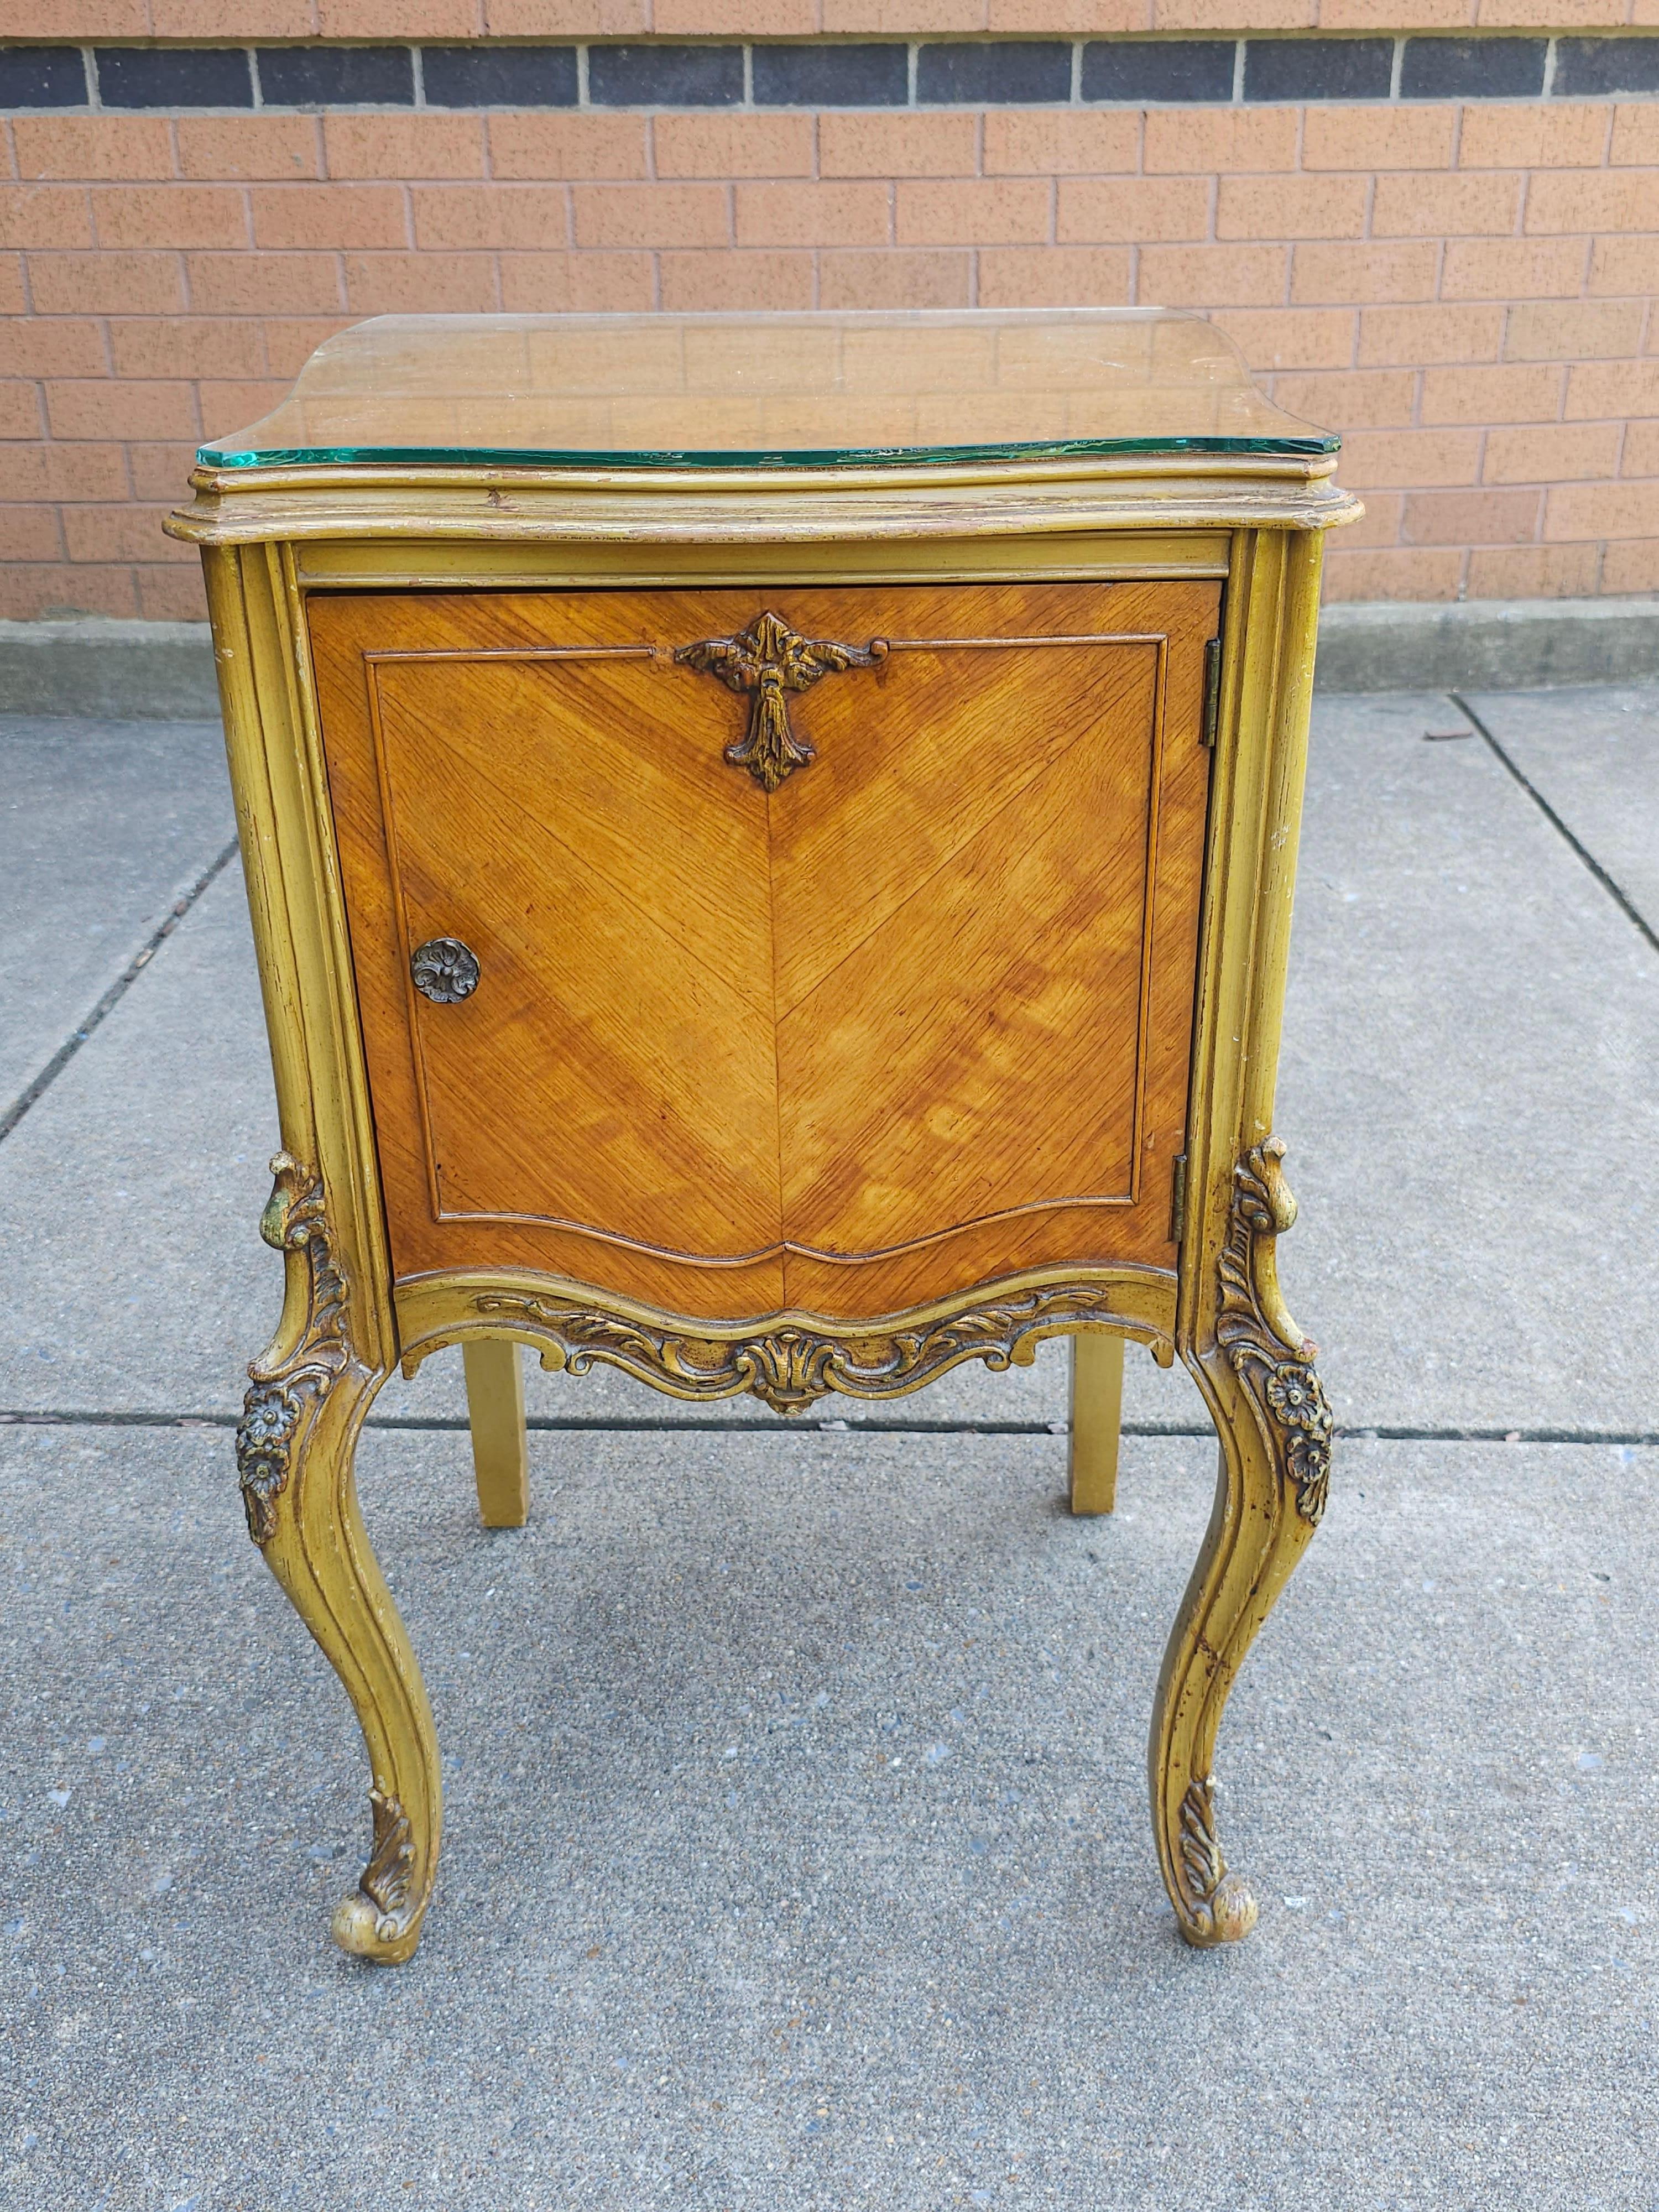 A Late 19th Century Louis XVI Style Provincial Walnut Bedside Cabinet with protective Glass Top. Measures 18.5